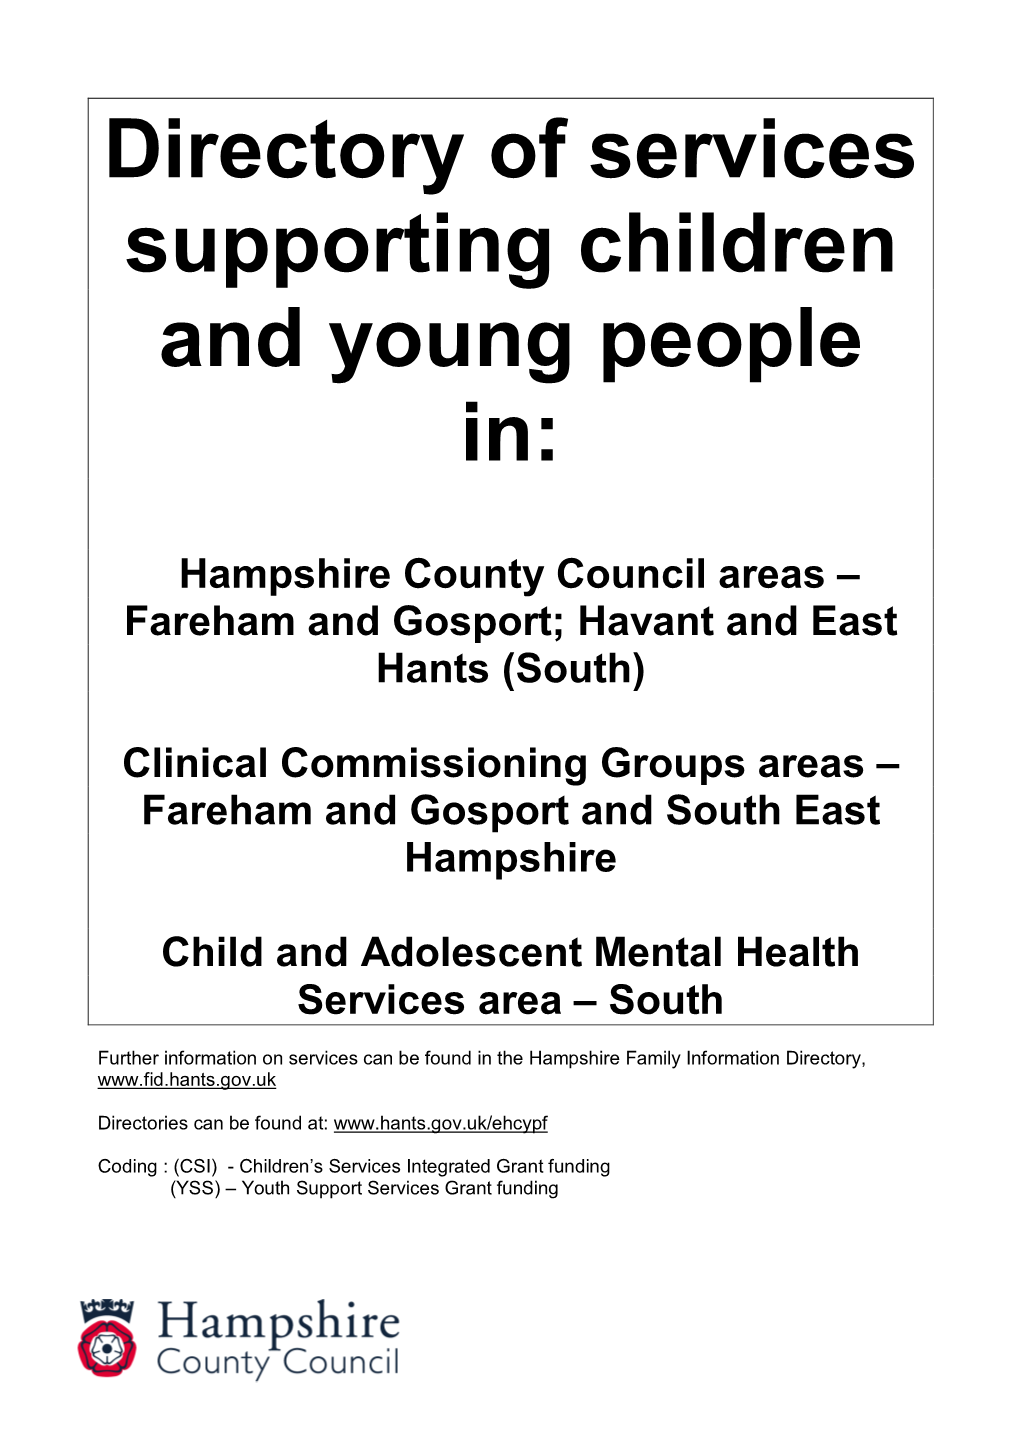 Directory of Services Supporting Children and Young People In